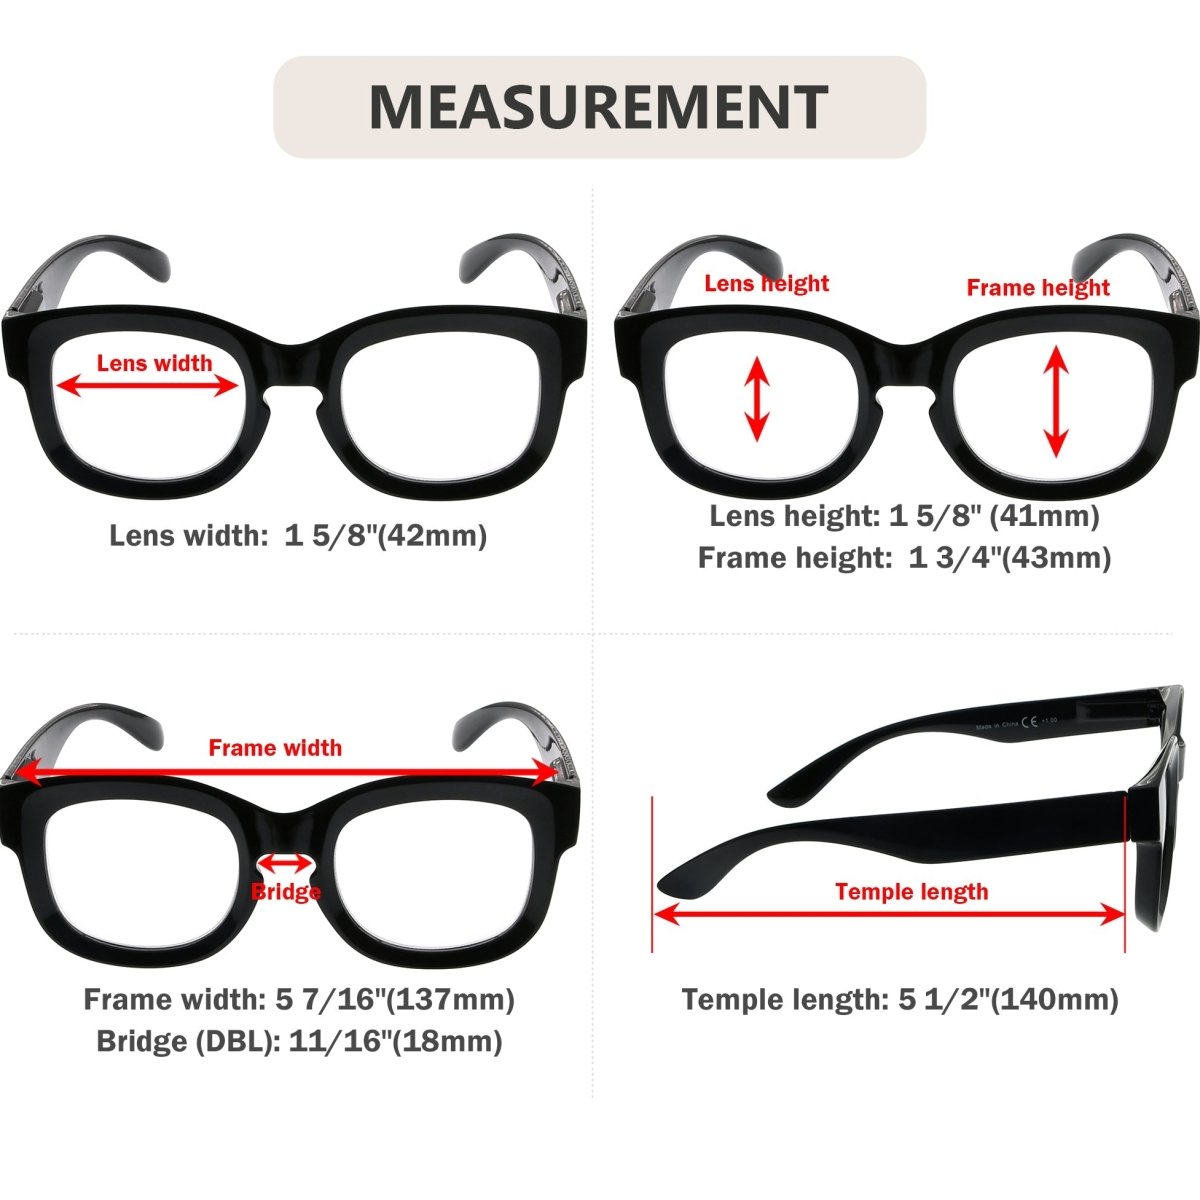 12 Pack Thicker Frame Reading Glasses Chic Readers R2013eyekeeper.com